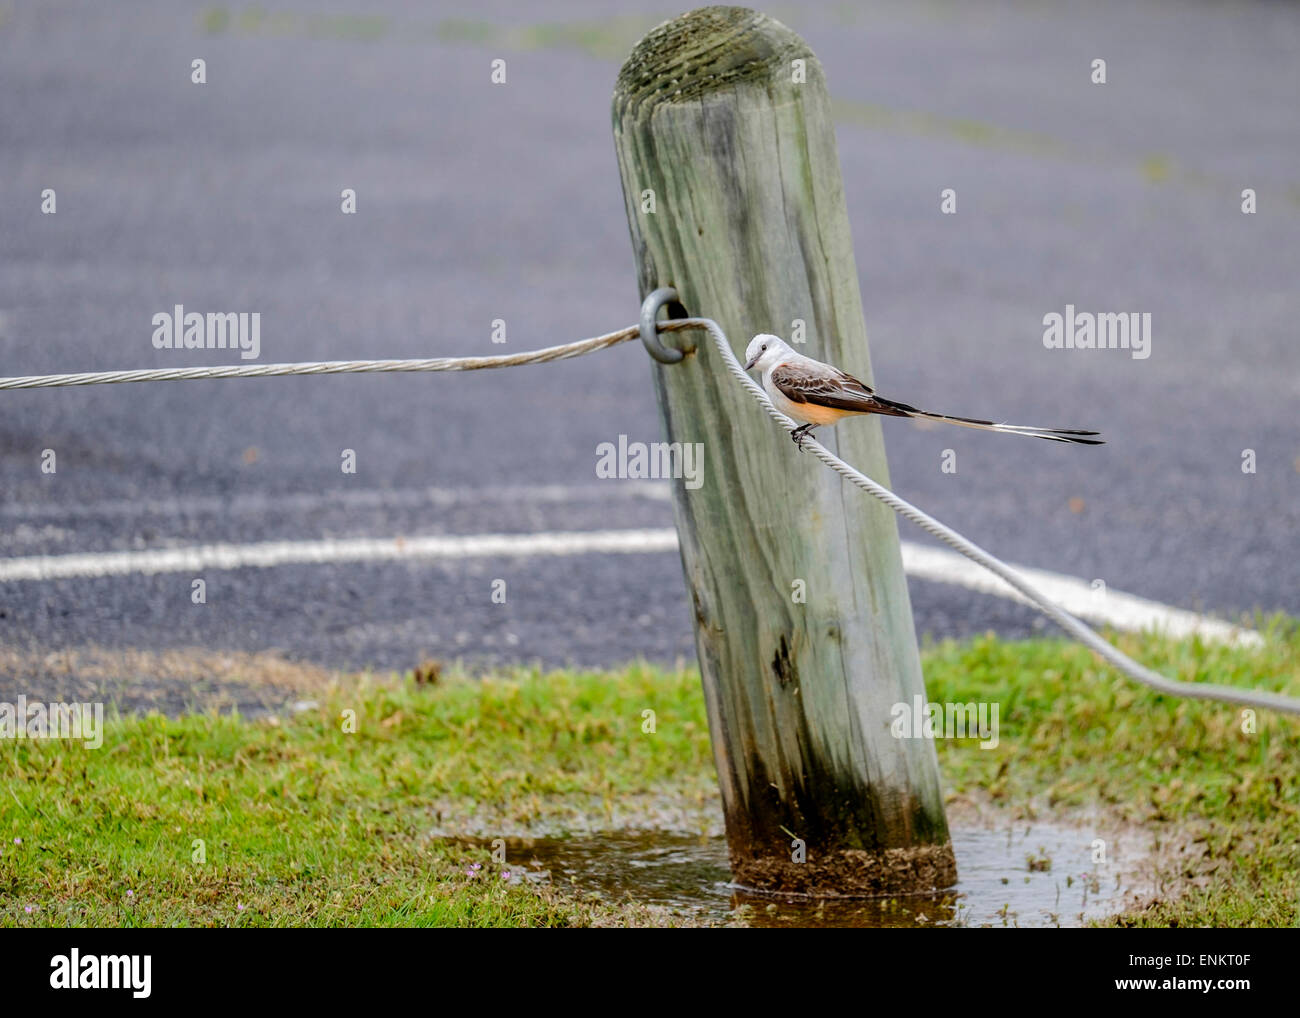 A Scissor-tailed Flycatcher or Tyrannus forficatus, perched on a cable fence.  Oklahoma State Bird. Oklahoma, USA. Stock Photo